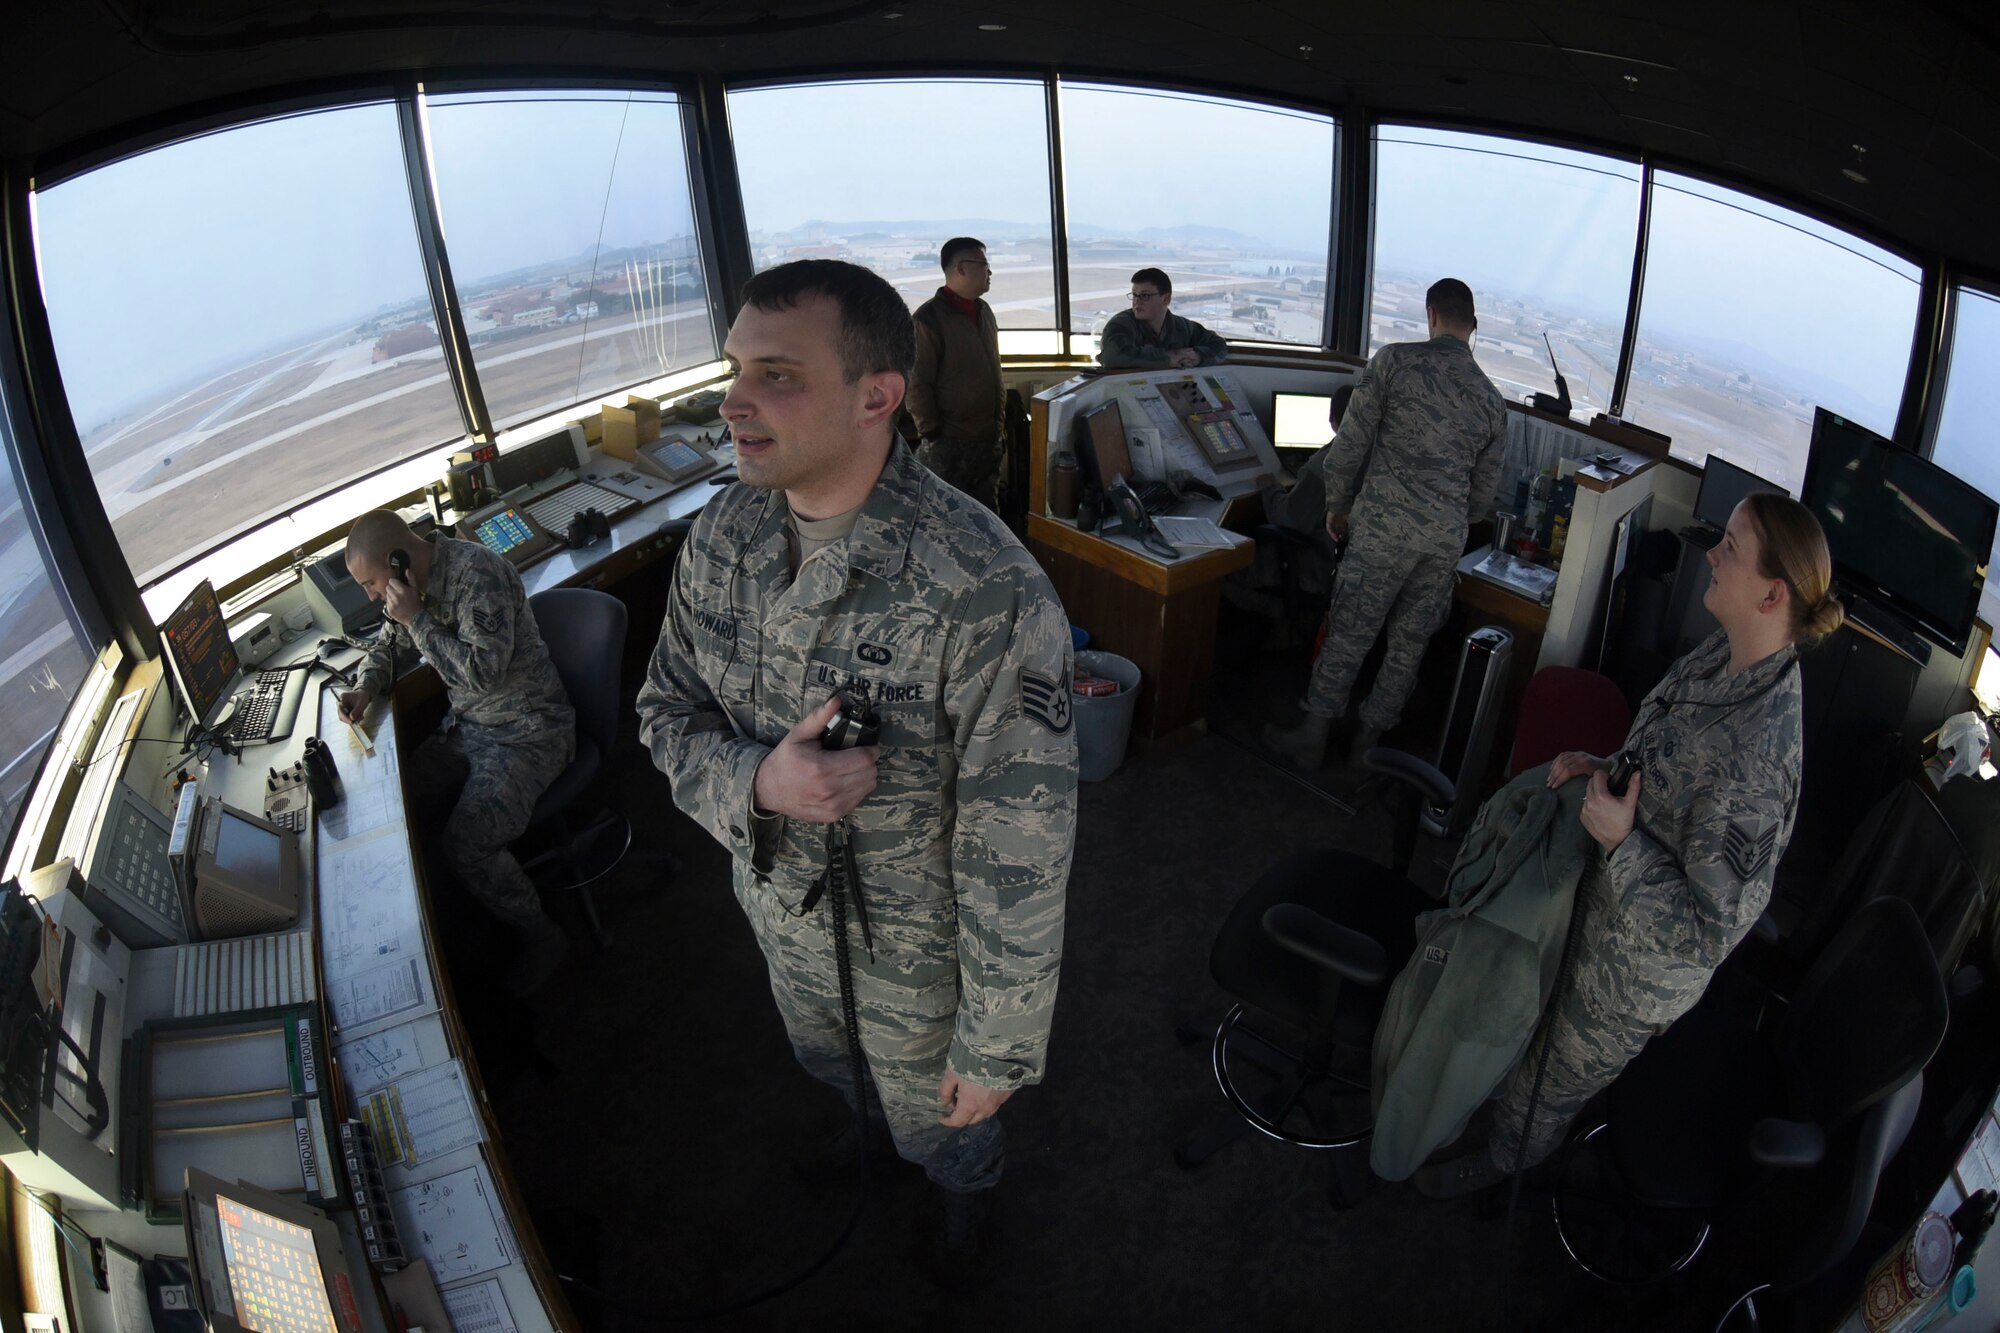 Air traffic control airmen perform operations in the airfield tower at Kunsan Air Base, Republic of Korea, Jan. 5, 2017. ATC ensures the safety of aircraft in the airspace around Kunsan. (U.S. Air Force photo by Senior Airman Michael Hunsaker/Released)